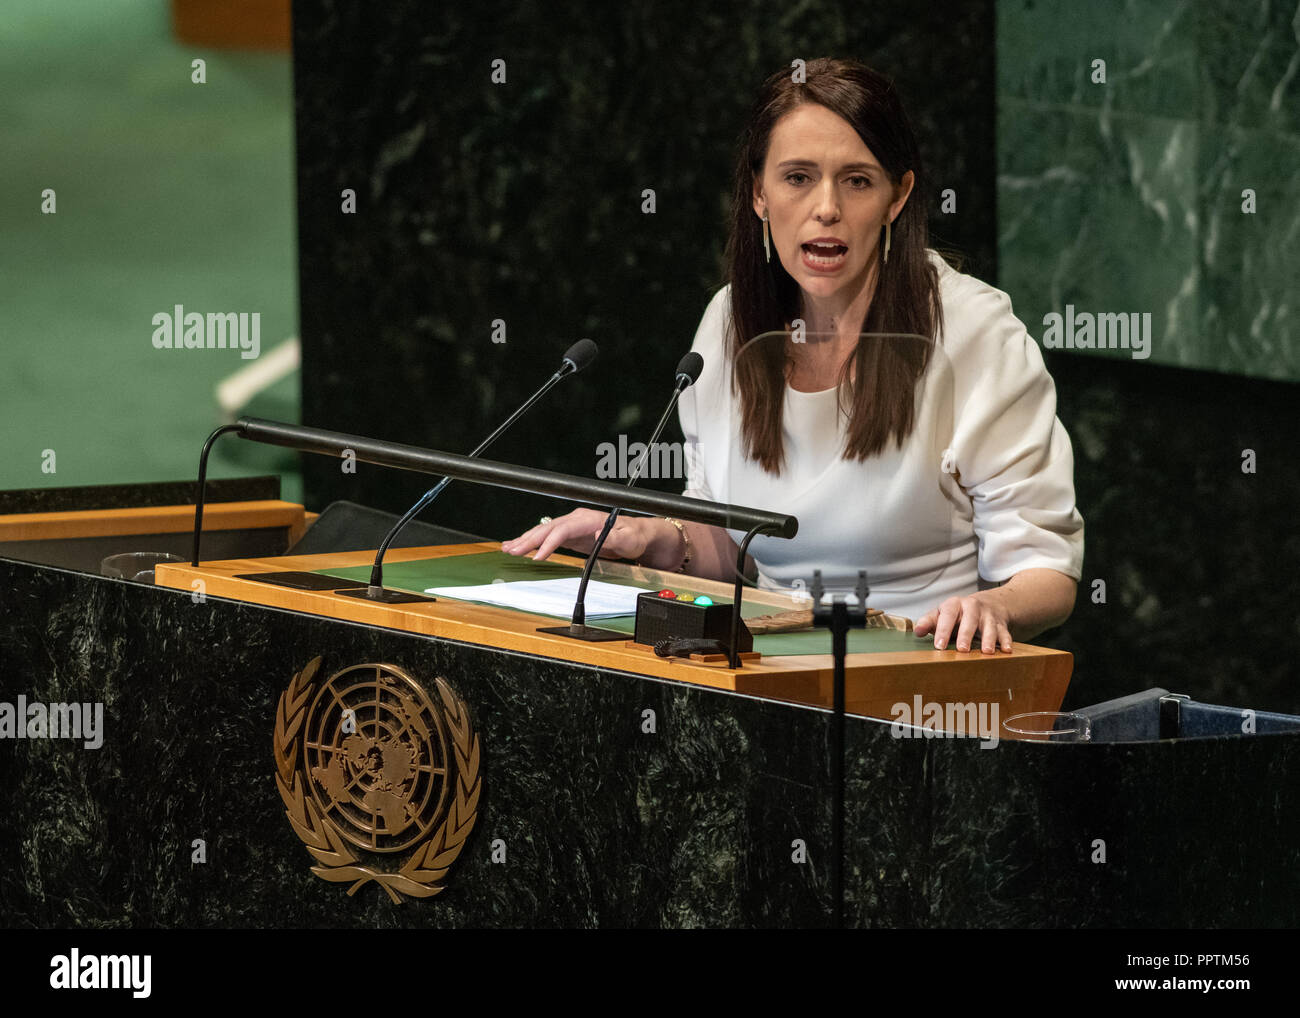 New York, USA, 27 September 2018. New Zealand Prime Minister Jacinda Ardern addresses the 73rd United Nations General Assembly at the UN headquarters in New York city. Photo by Enrique Shore Stock Photo